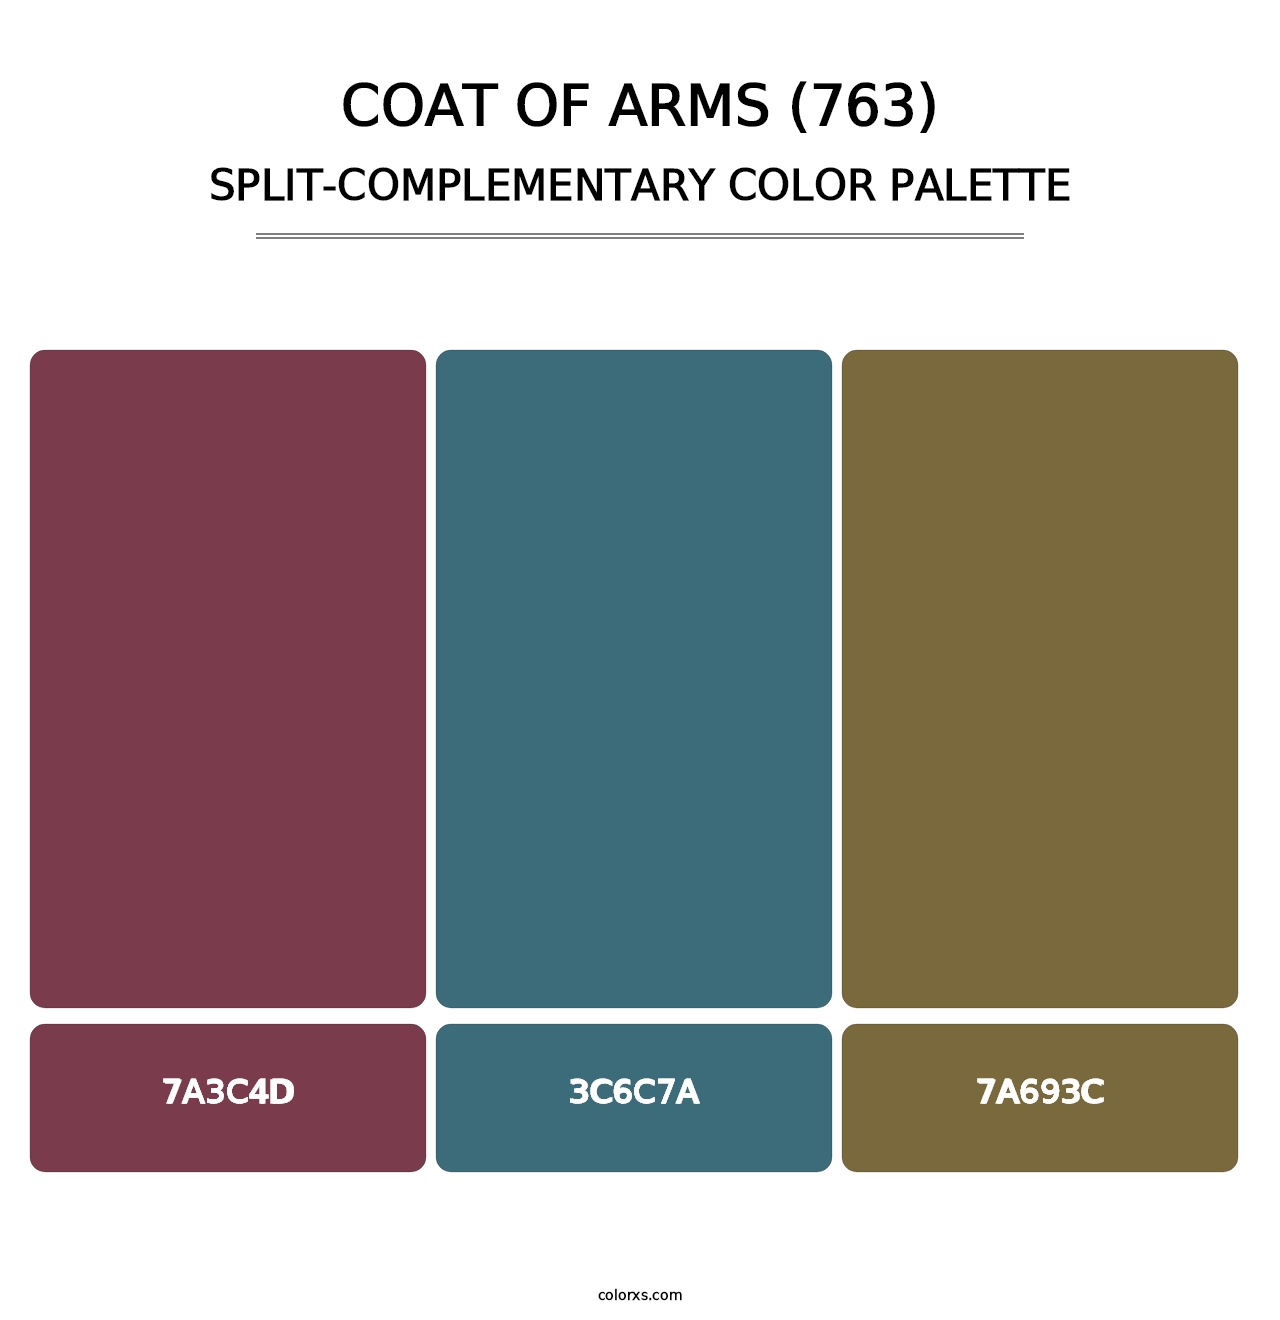 Coat of Arms (763) - Split-Complementary Color Palette